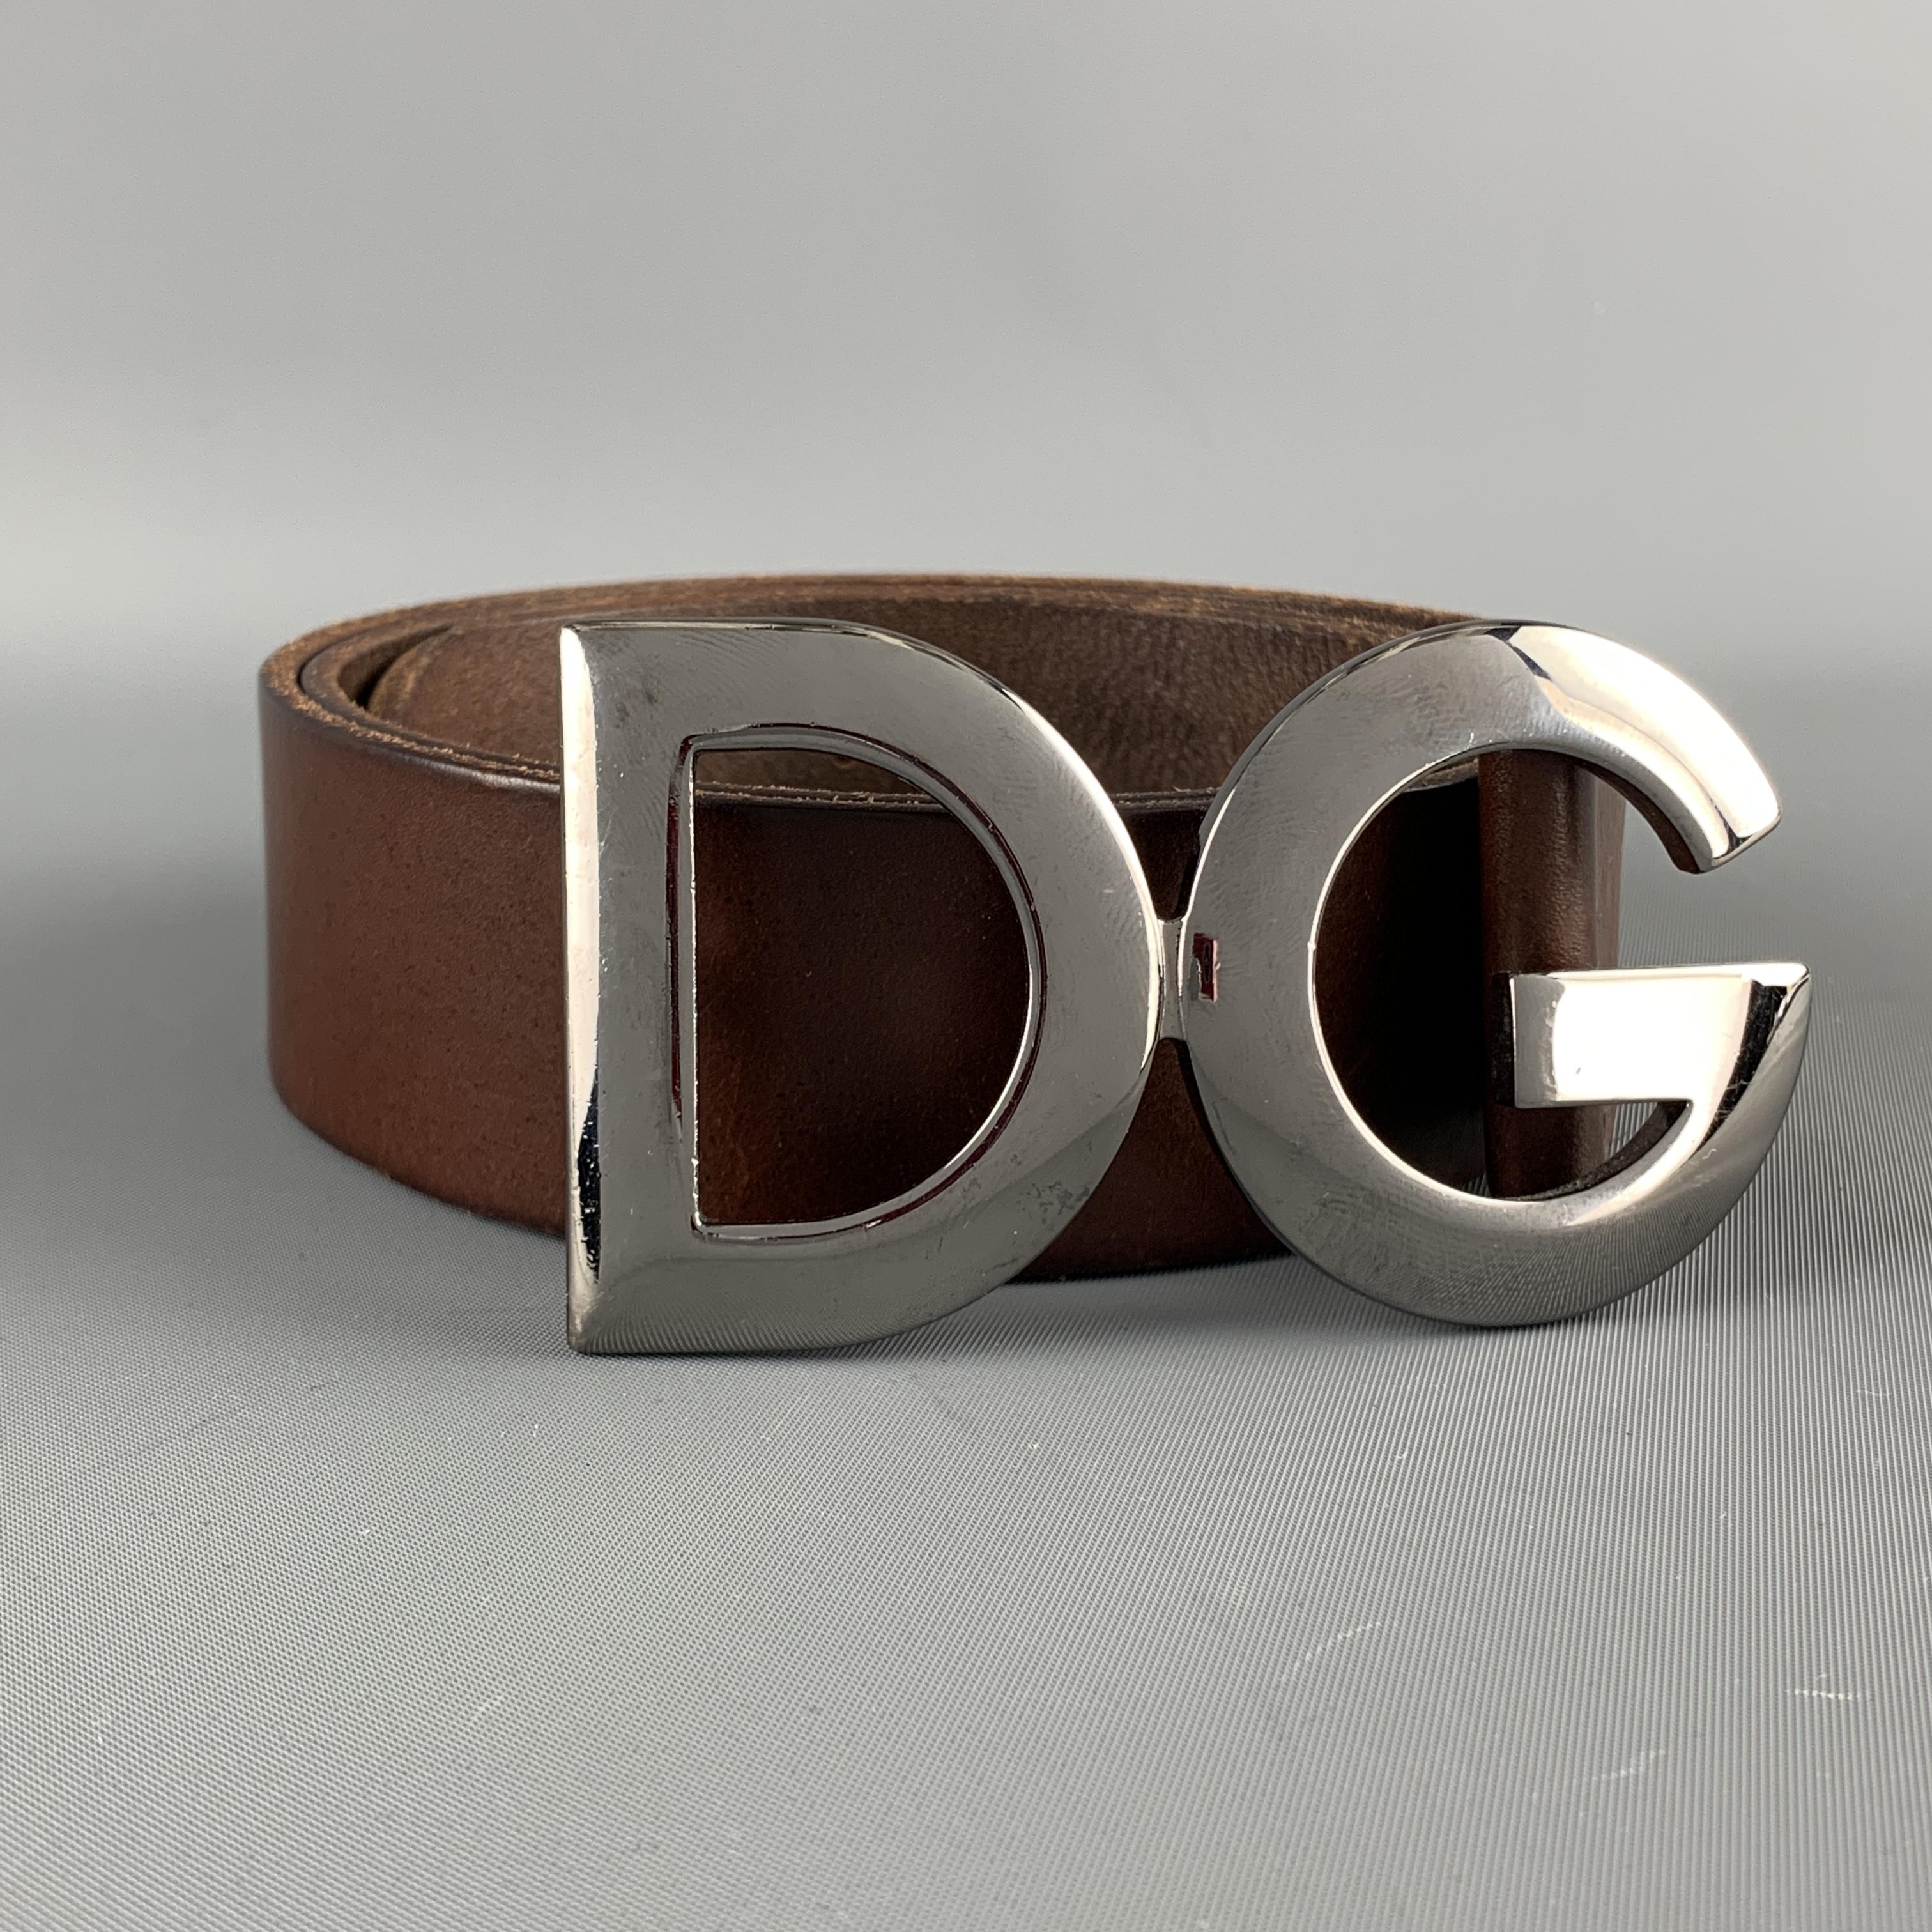 DOLCE & GABBANA belt features a brown leather strap with a dark silver tone DG buckle. Minor wear. As-is. Made in Italy.

Very Good Pre-Owned Condition.
Marked: 95 cm - 38 in.

Length:44 in.
Width: 1.5 in.
Fits: 36-40 in.
Buckle: 10 x 5.5 cm.